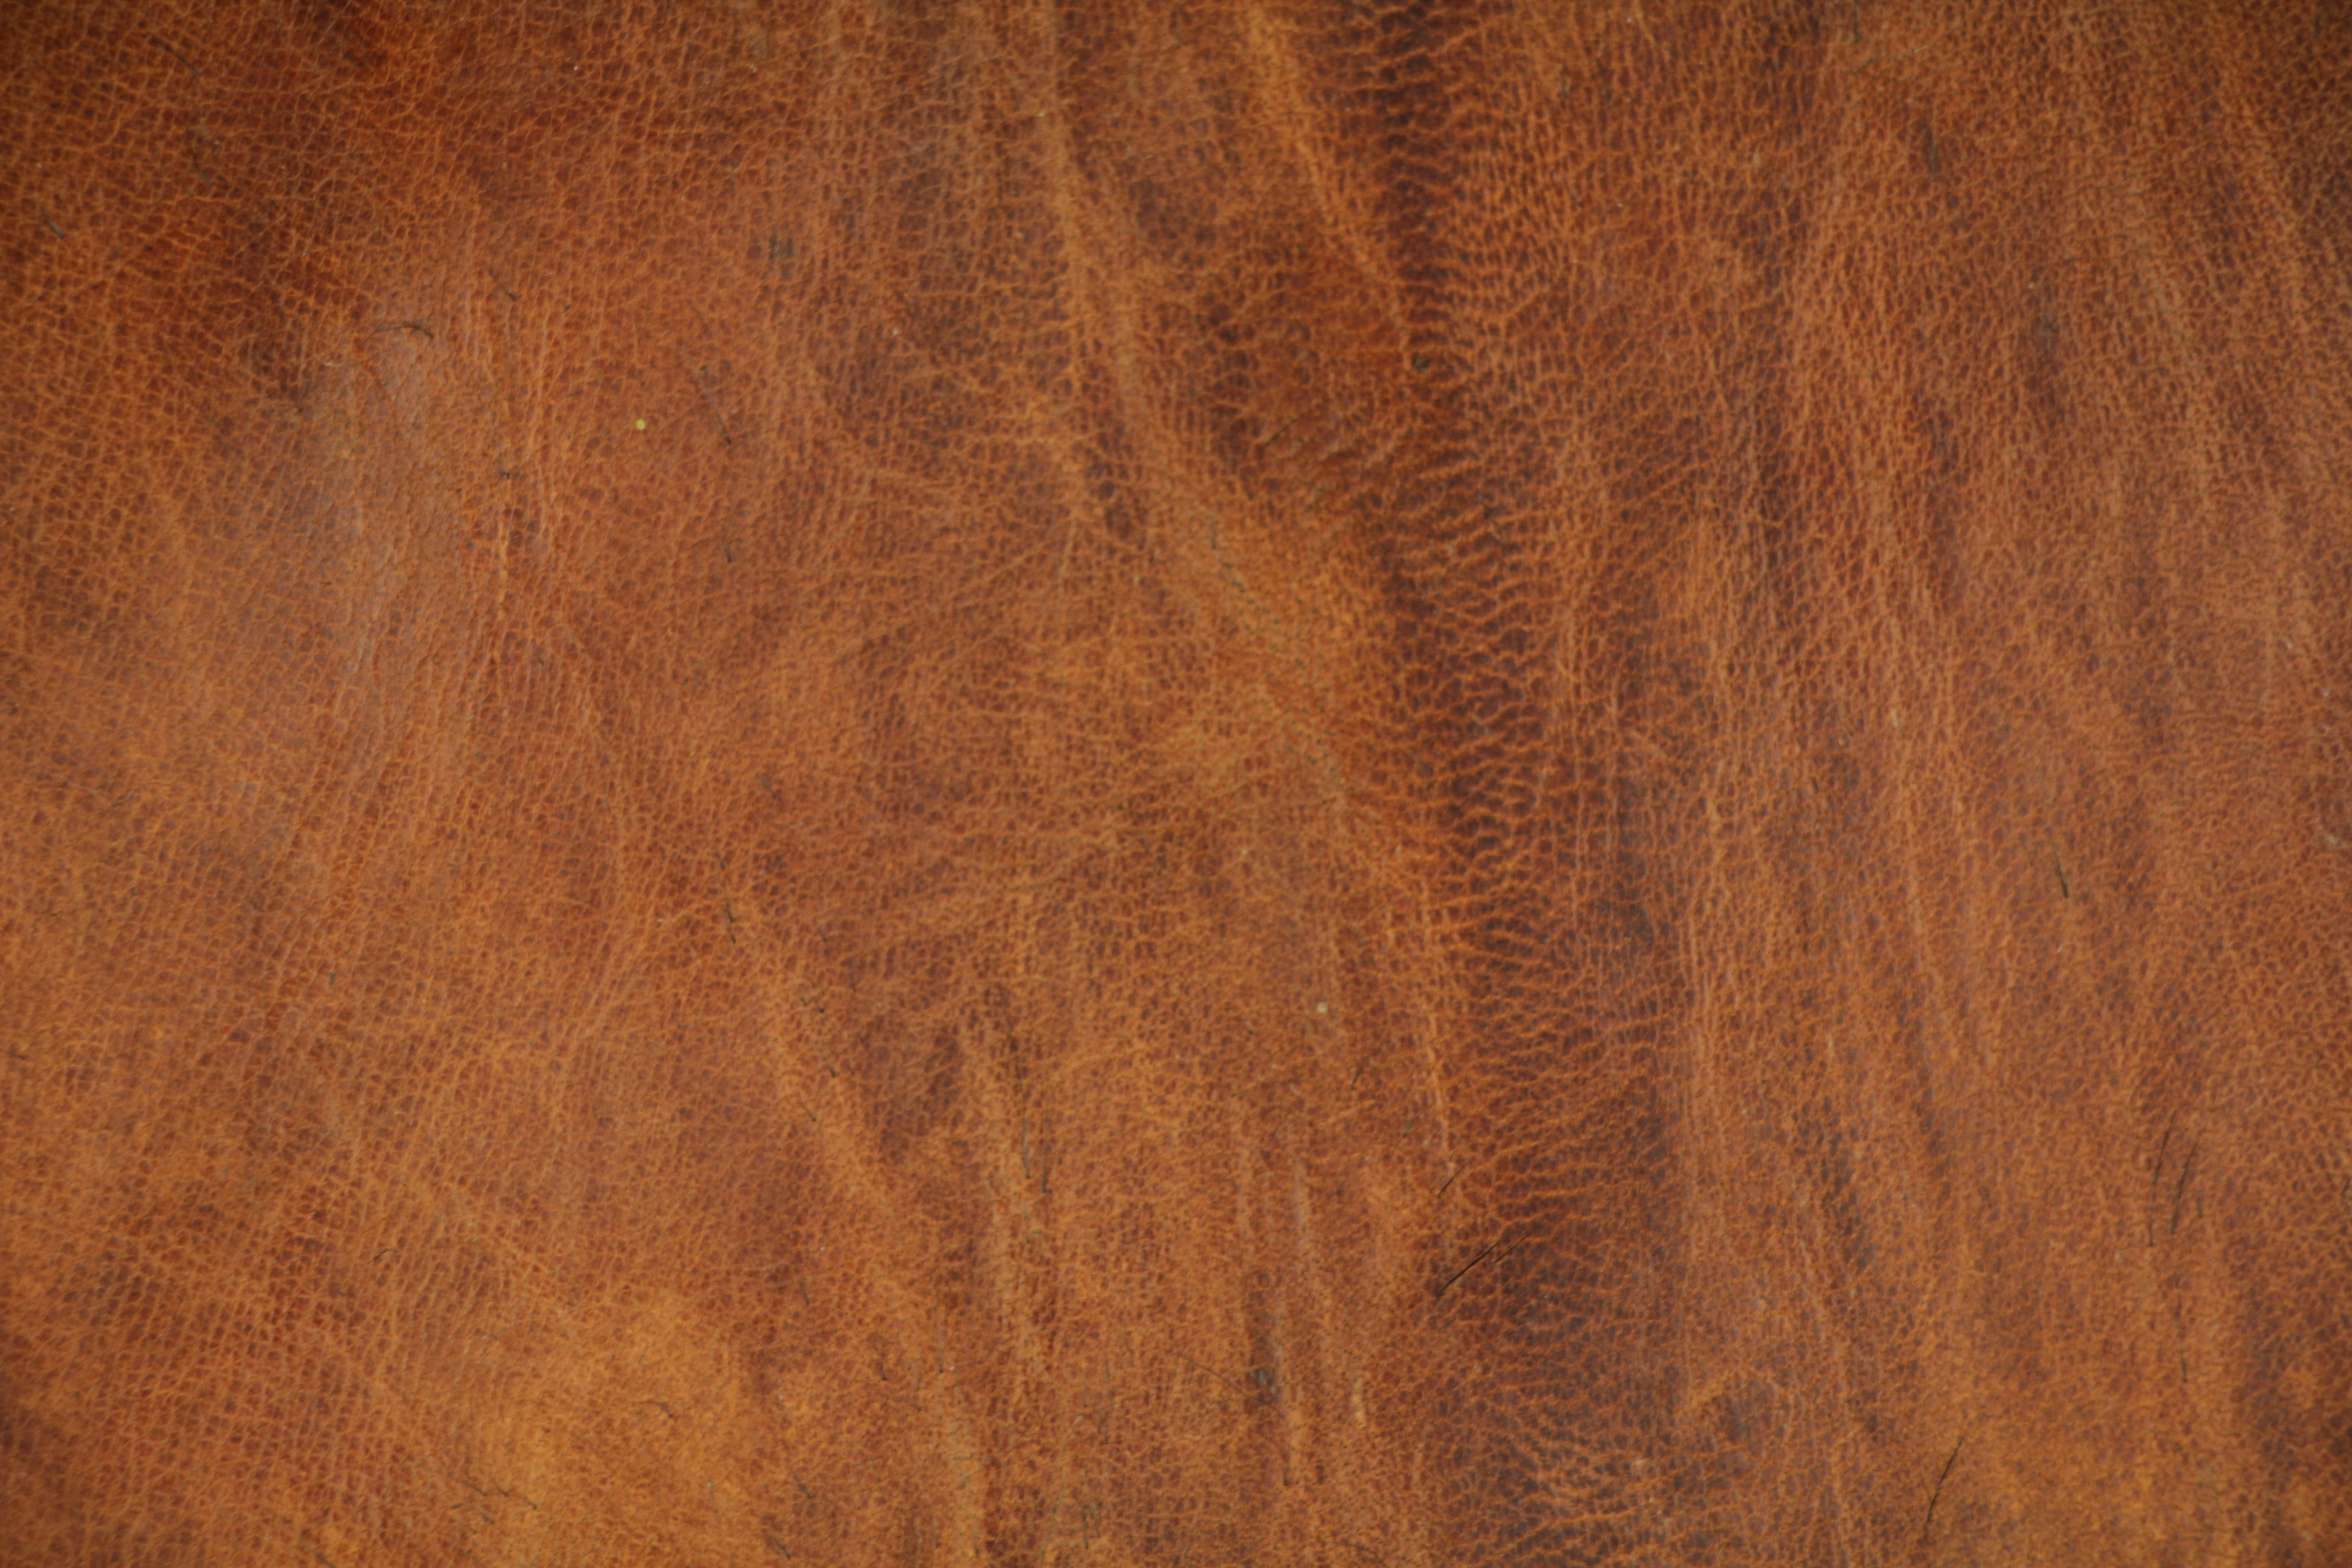 wallpaper rustic brown leather  and premium TextureX smooth photo  cattle texture material Free genuine  orange